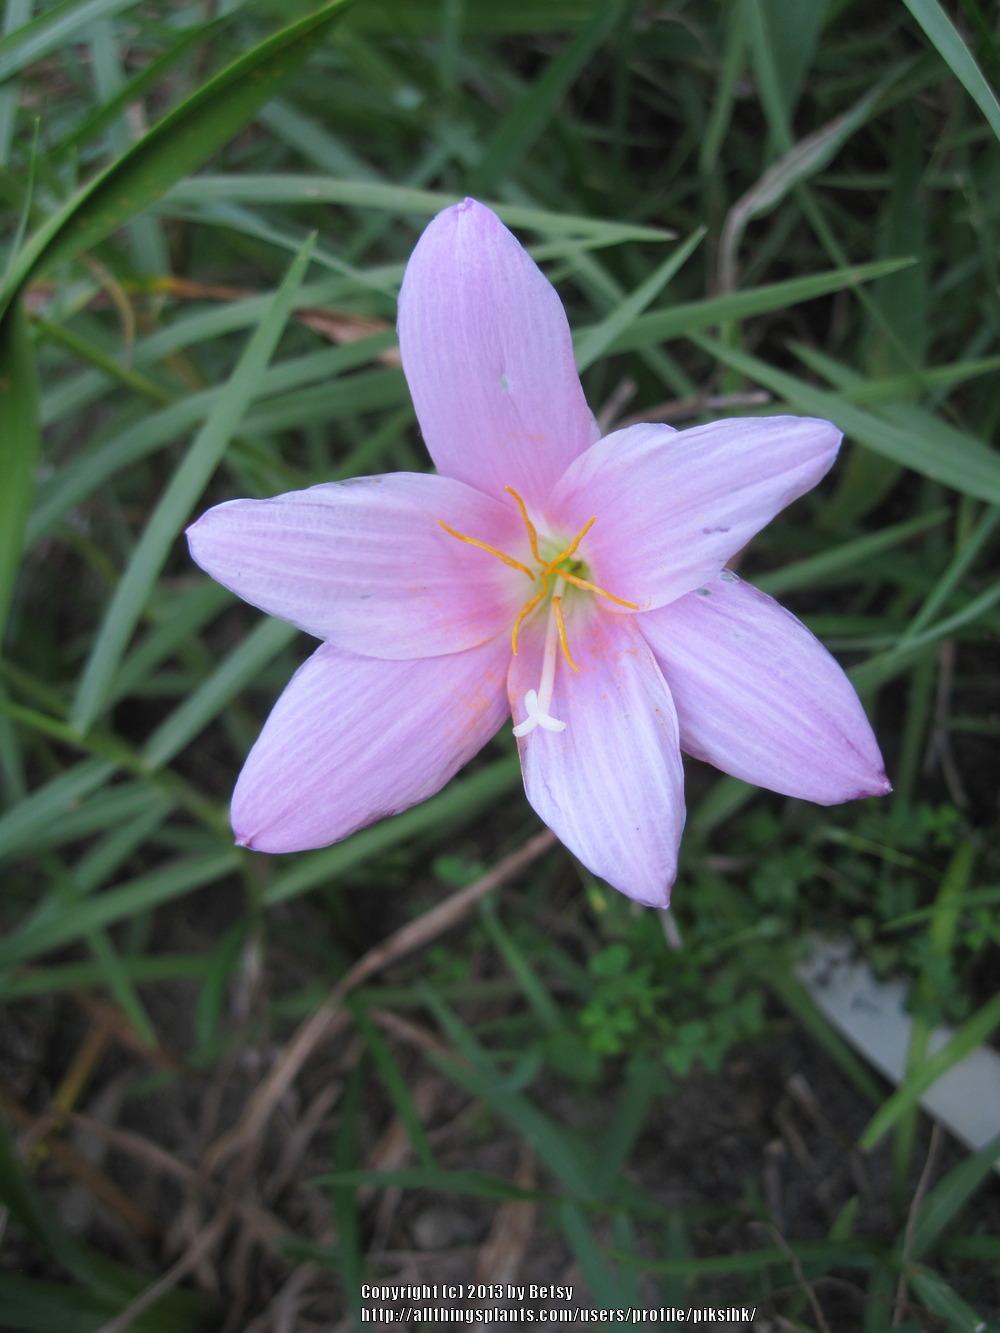 Photo of Pink Rain Lily (Zephyranthes minuta) uploaded by piksihk